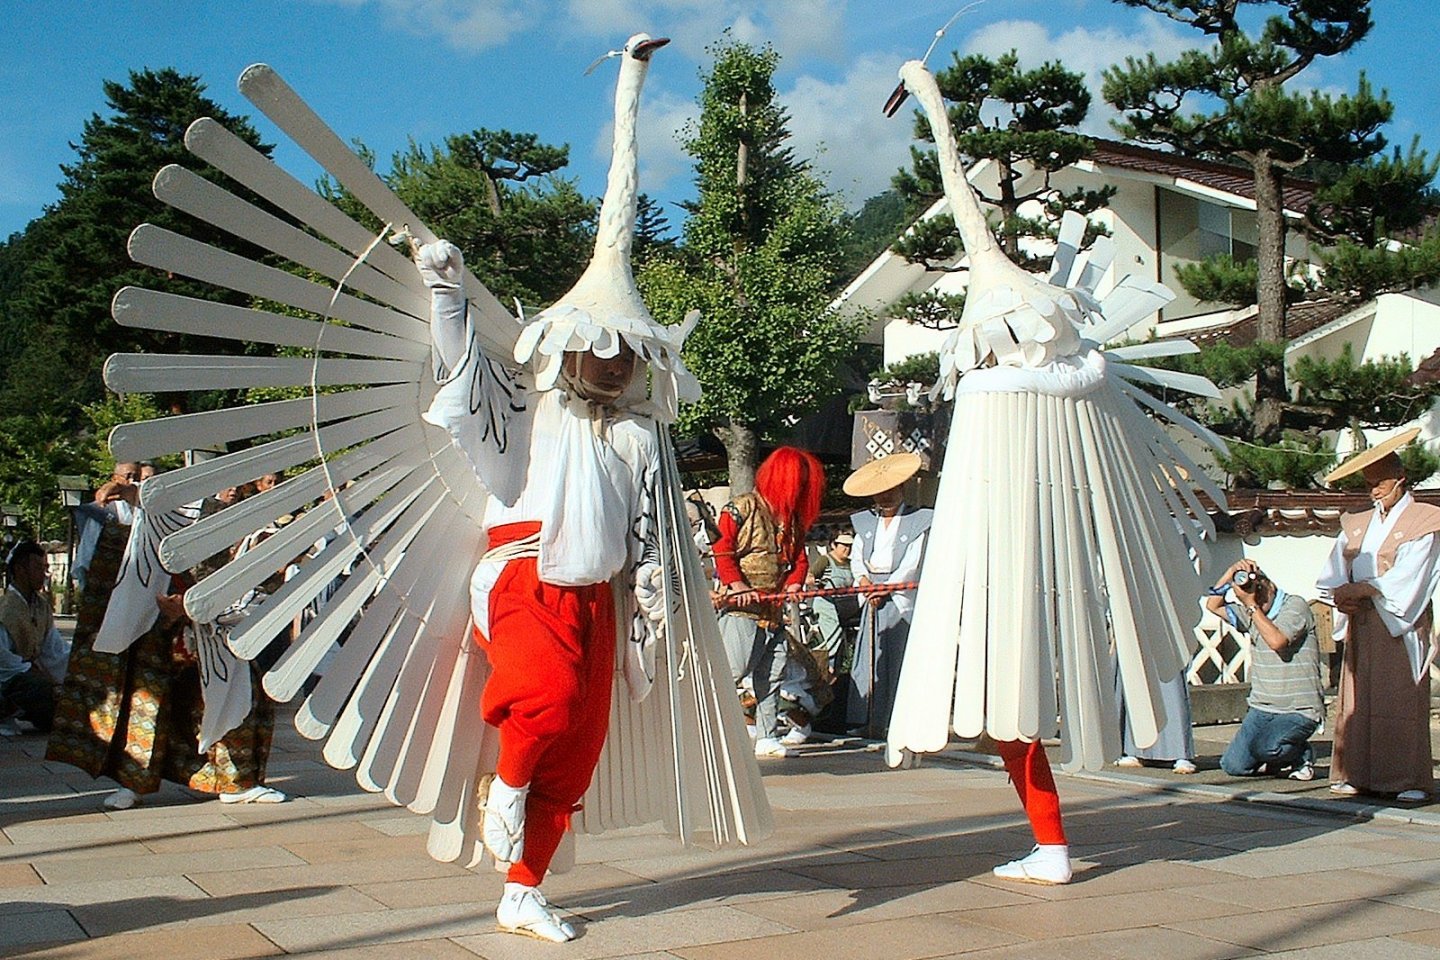 Heron Dance, a festival with over 500 years of history